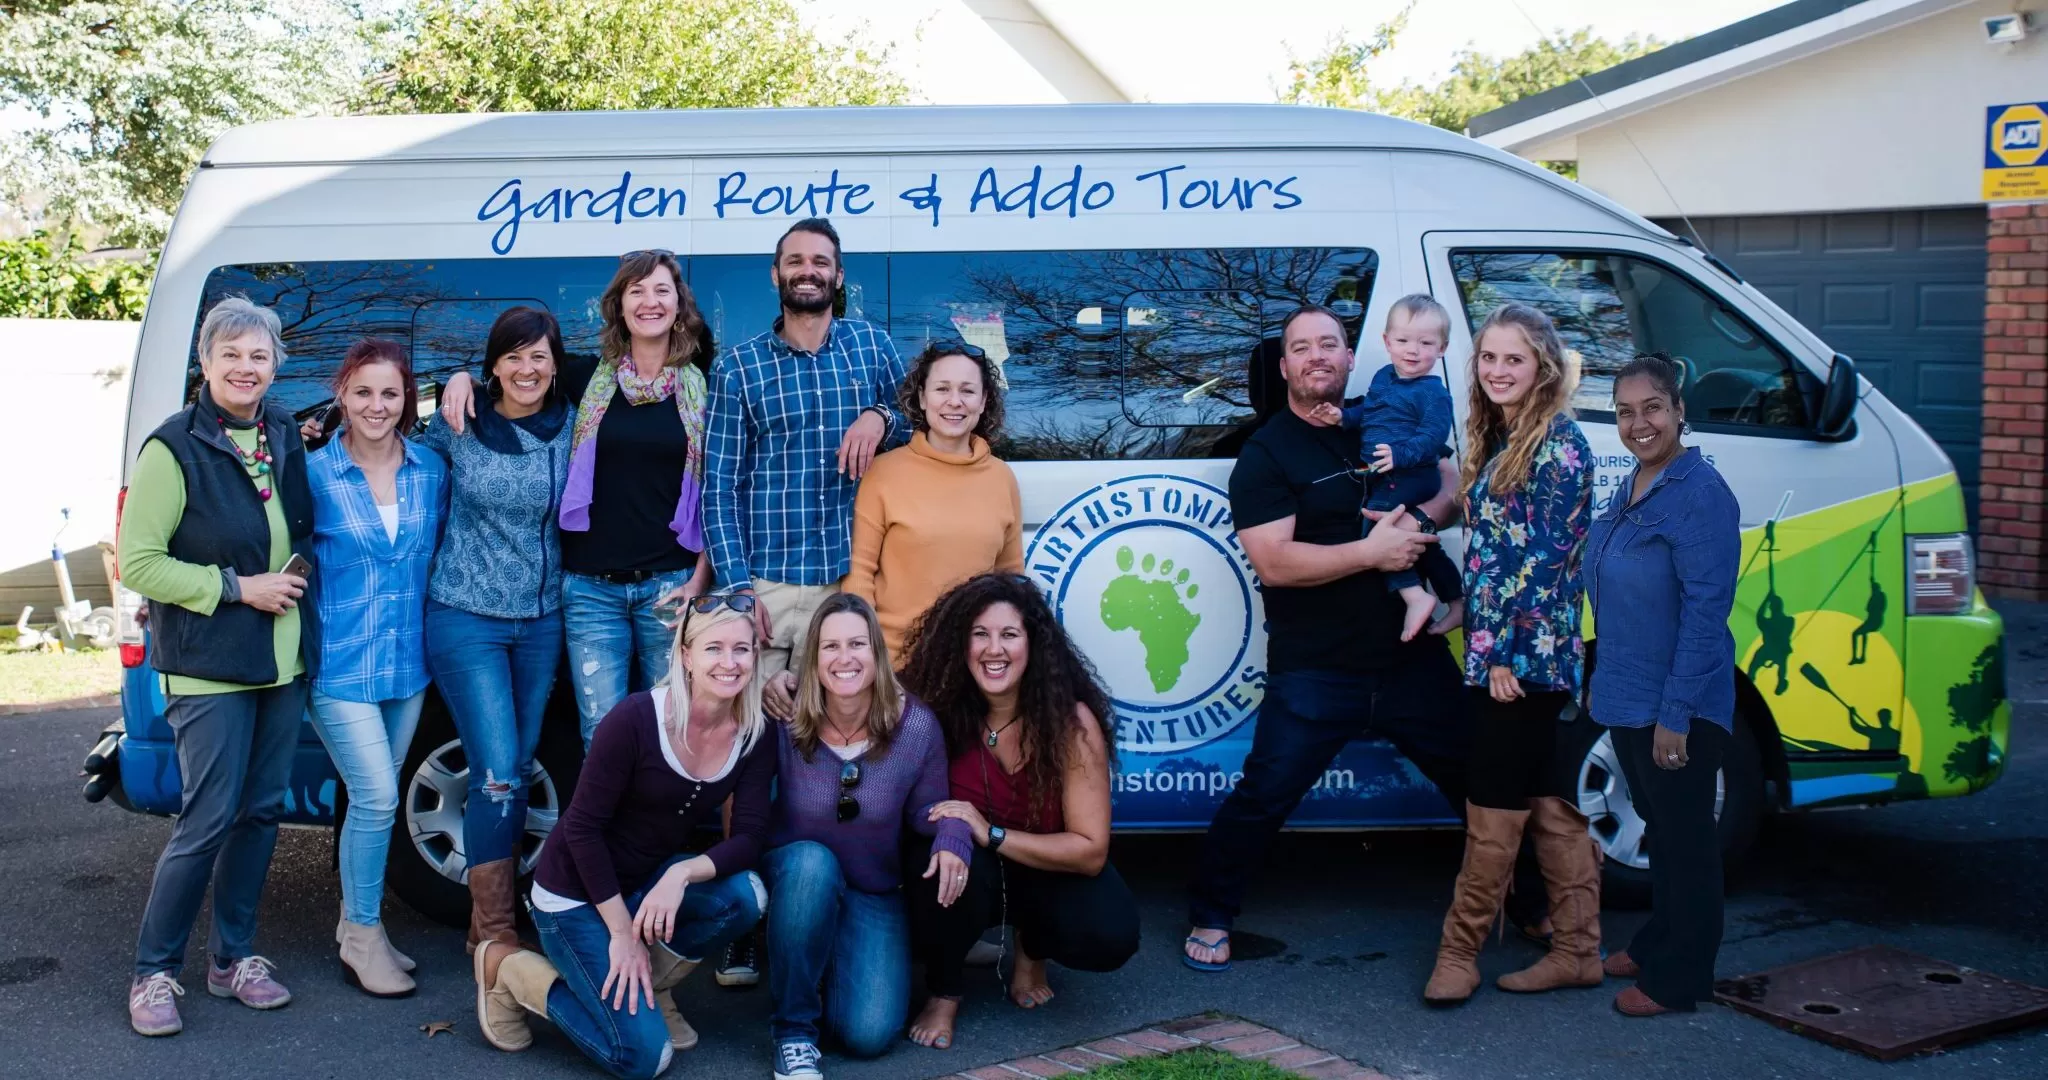 Earthstompers Garden Route Tours in South Africa